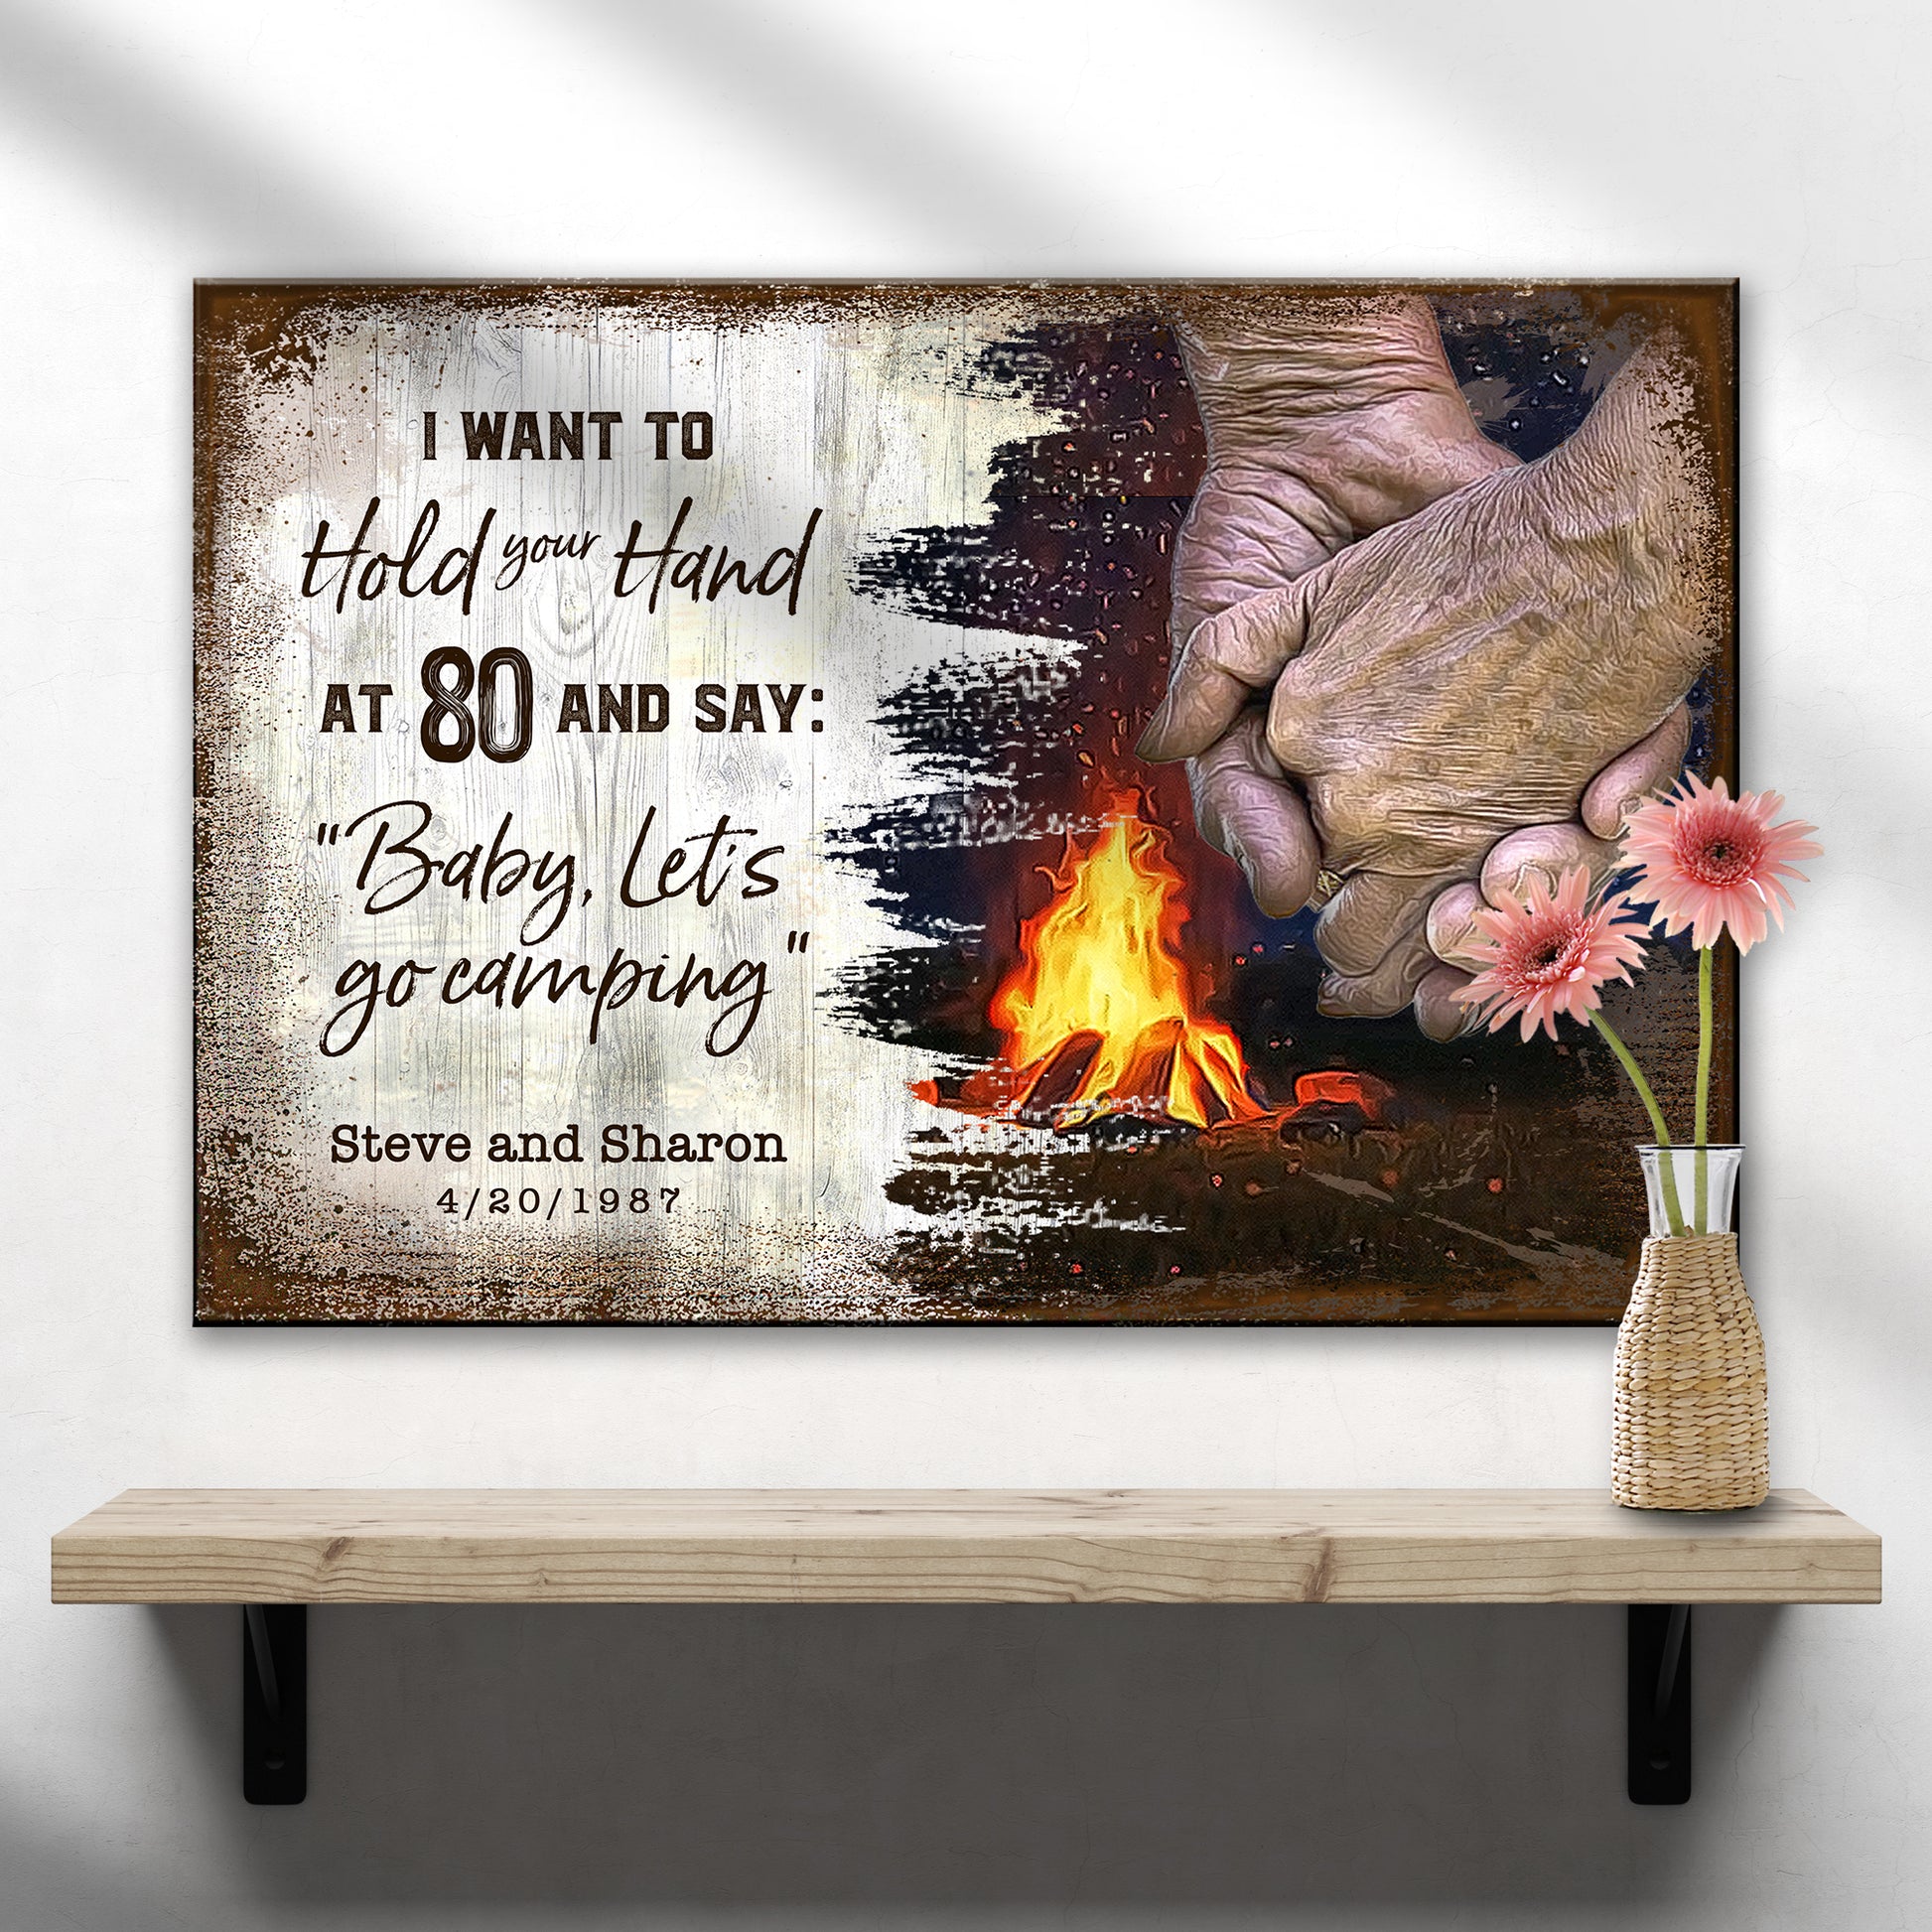 Baby Let's Go Camping Sign II - Image by Tailored Canvases